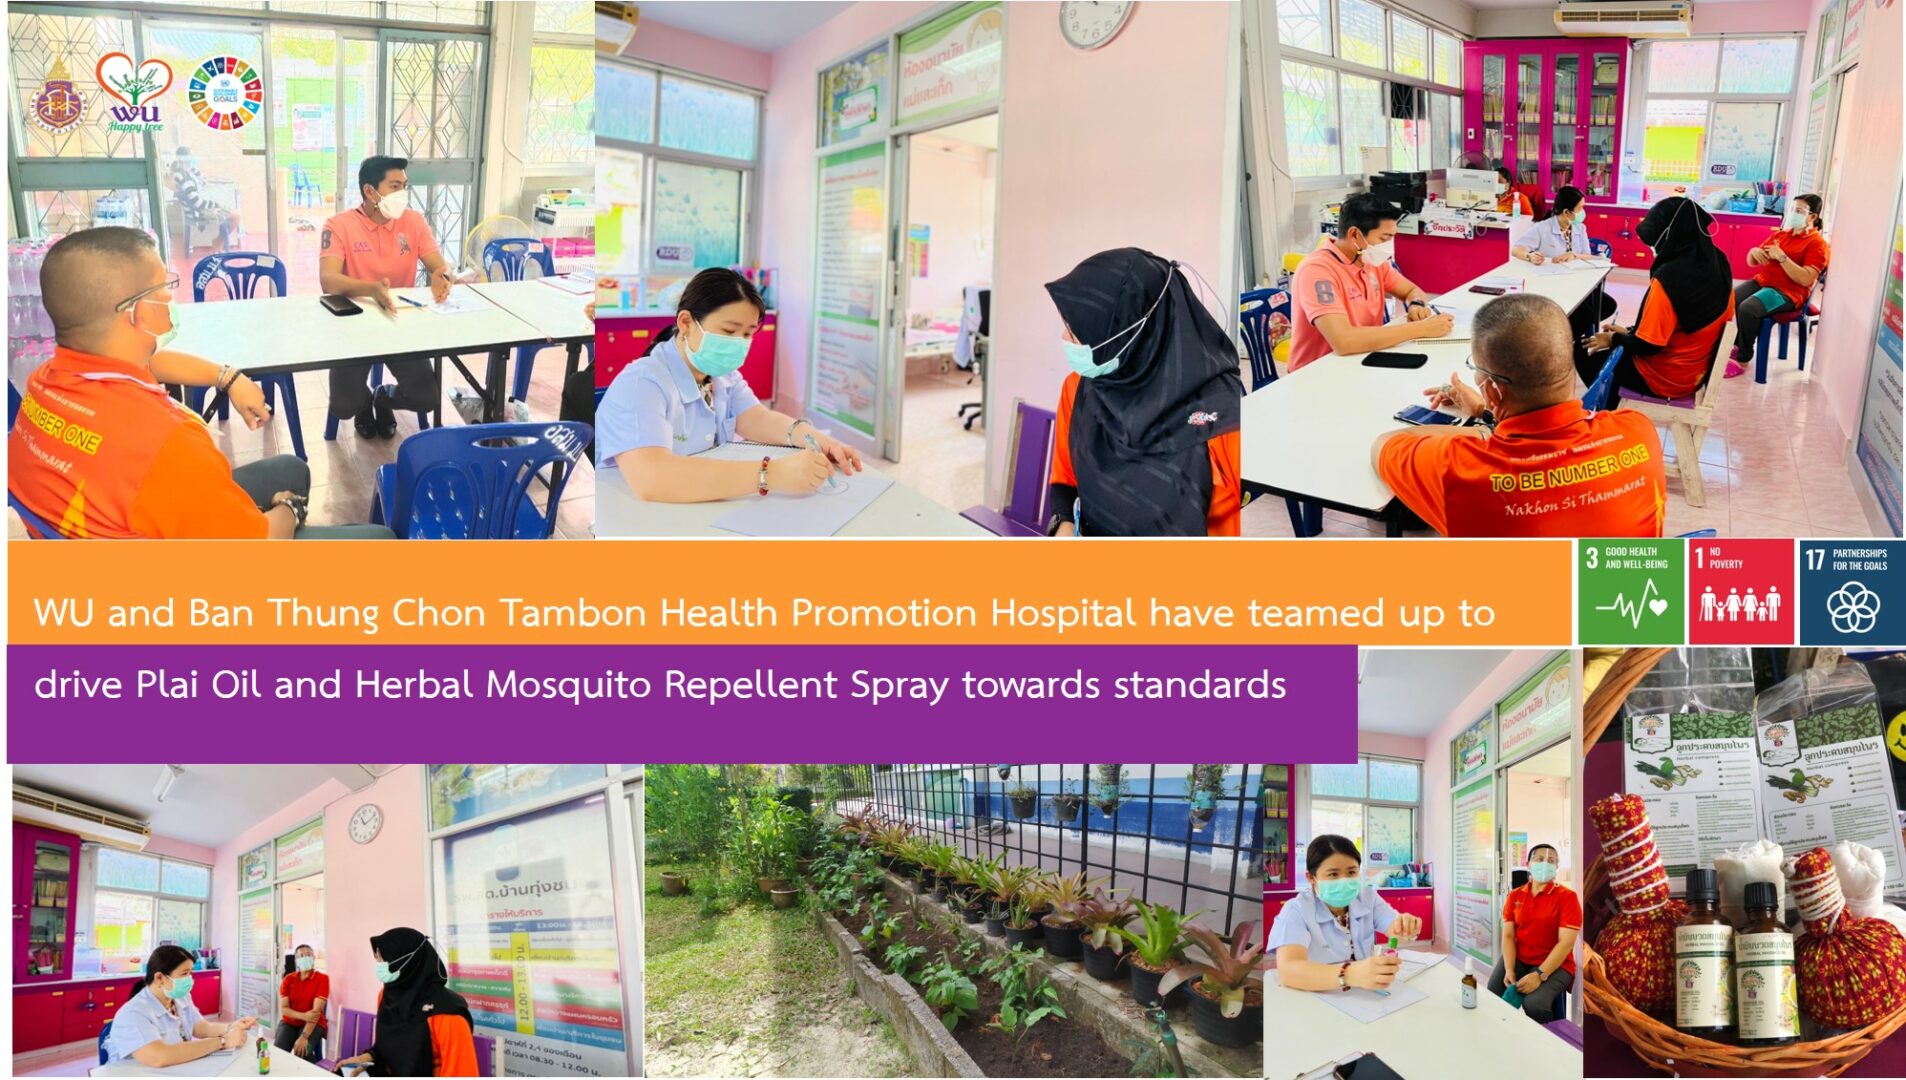 WU and Ban Thung Chon Tambon Health Promotion Hospital have teamed up to drive Plai Oil and Herbal Mosquito Repellent Spray towards standards